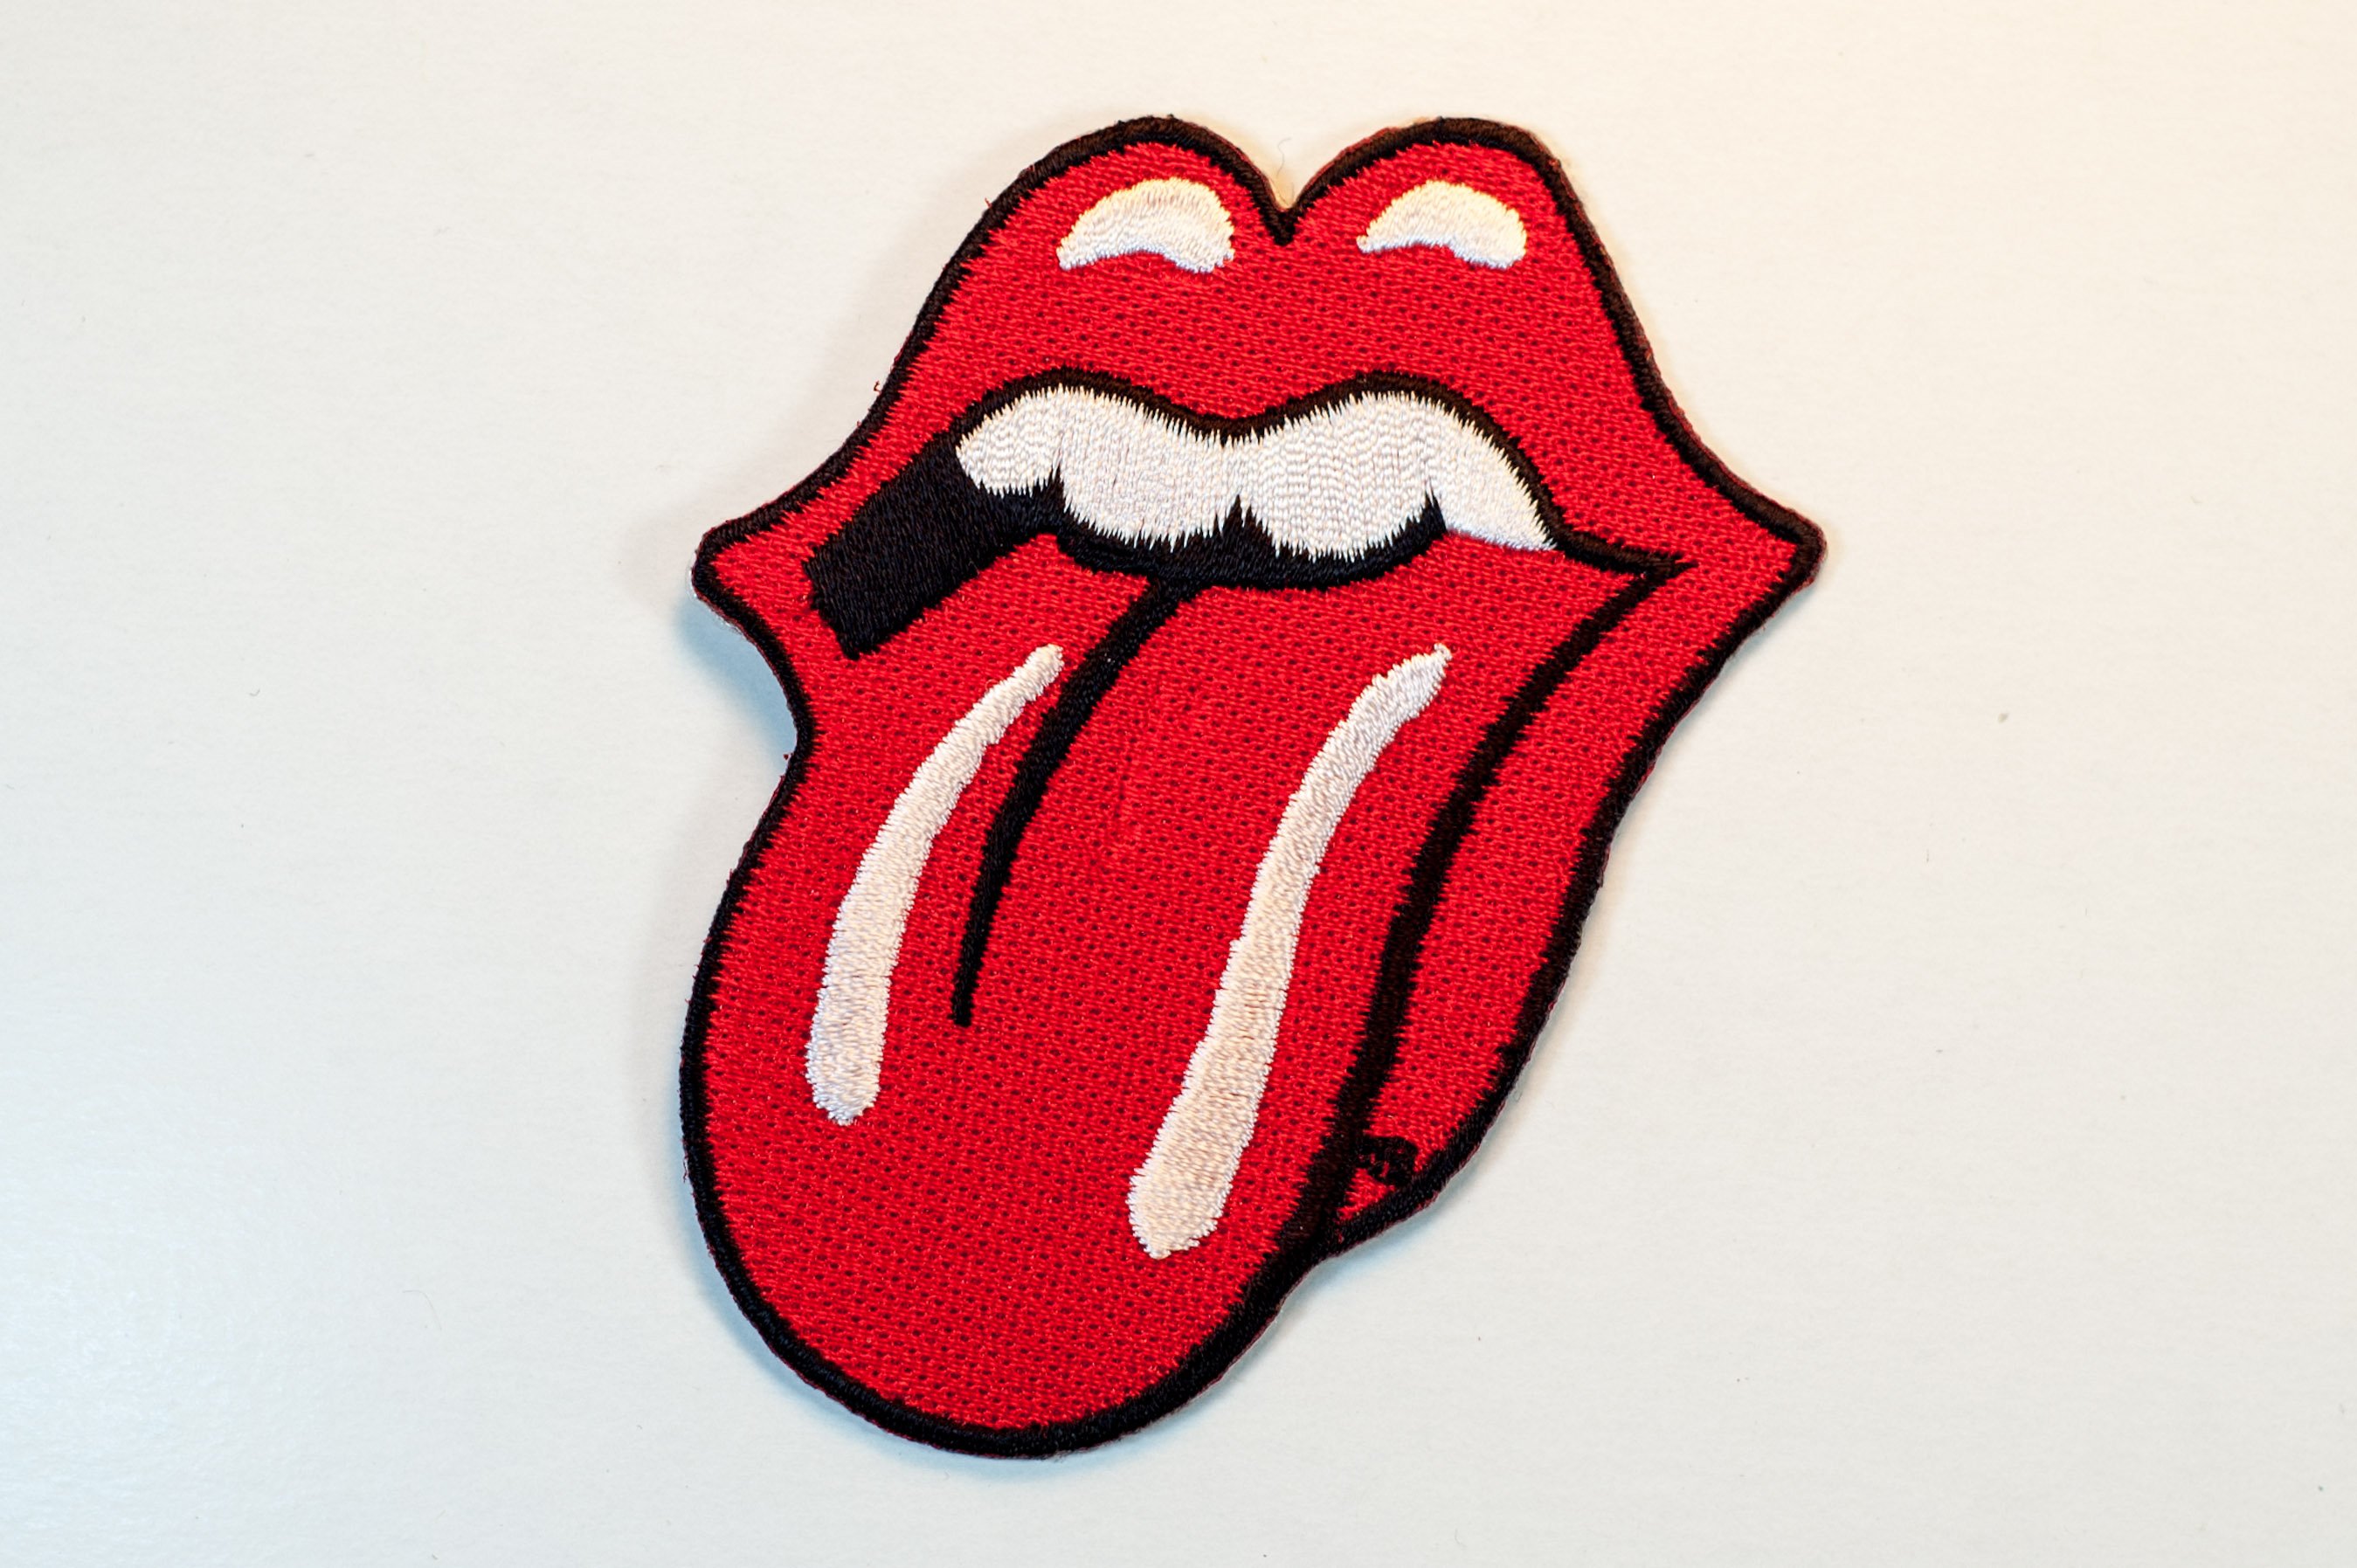 rolling stones logo   Images Search Pasutri 2698x1795